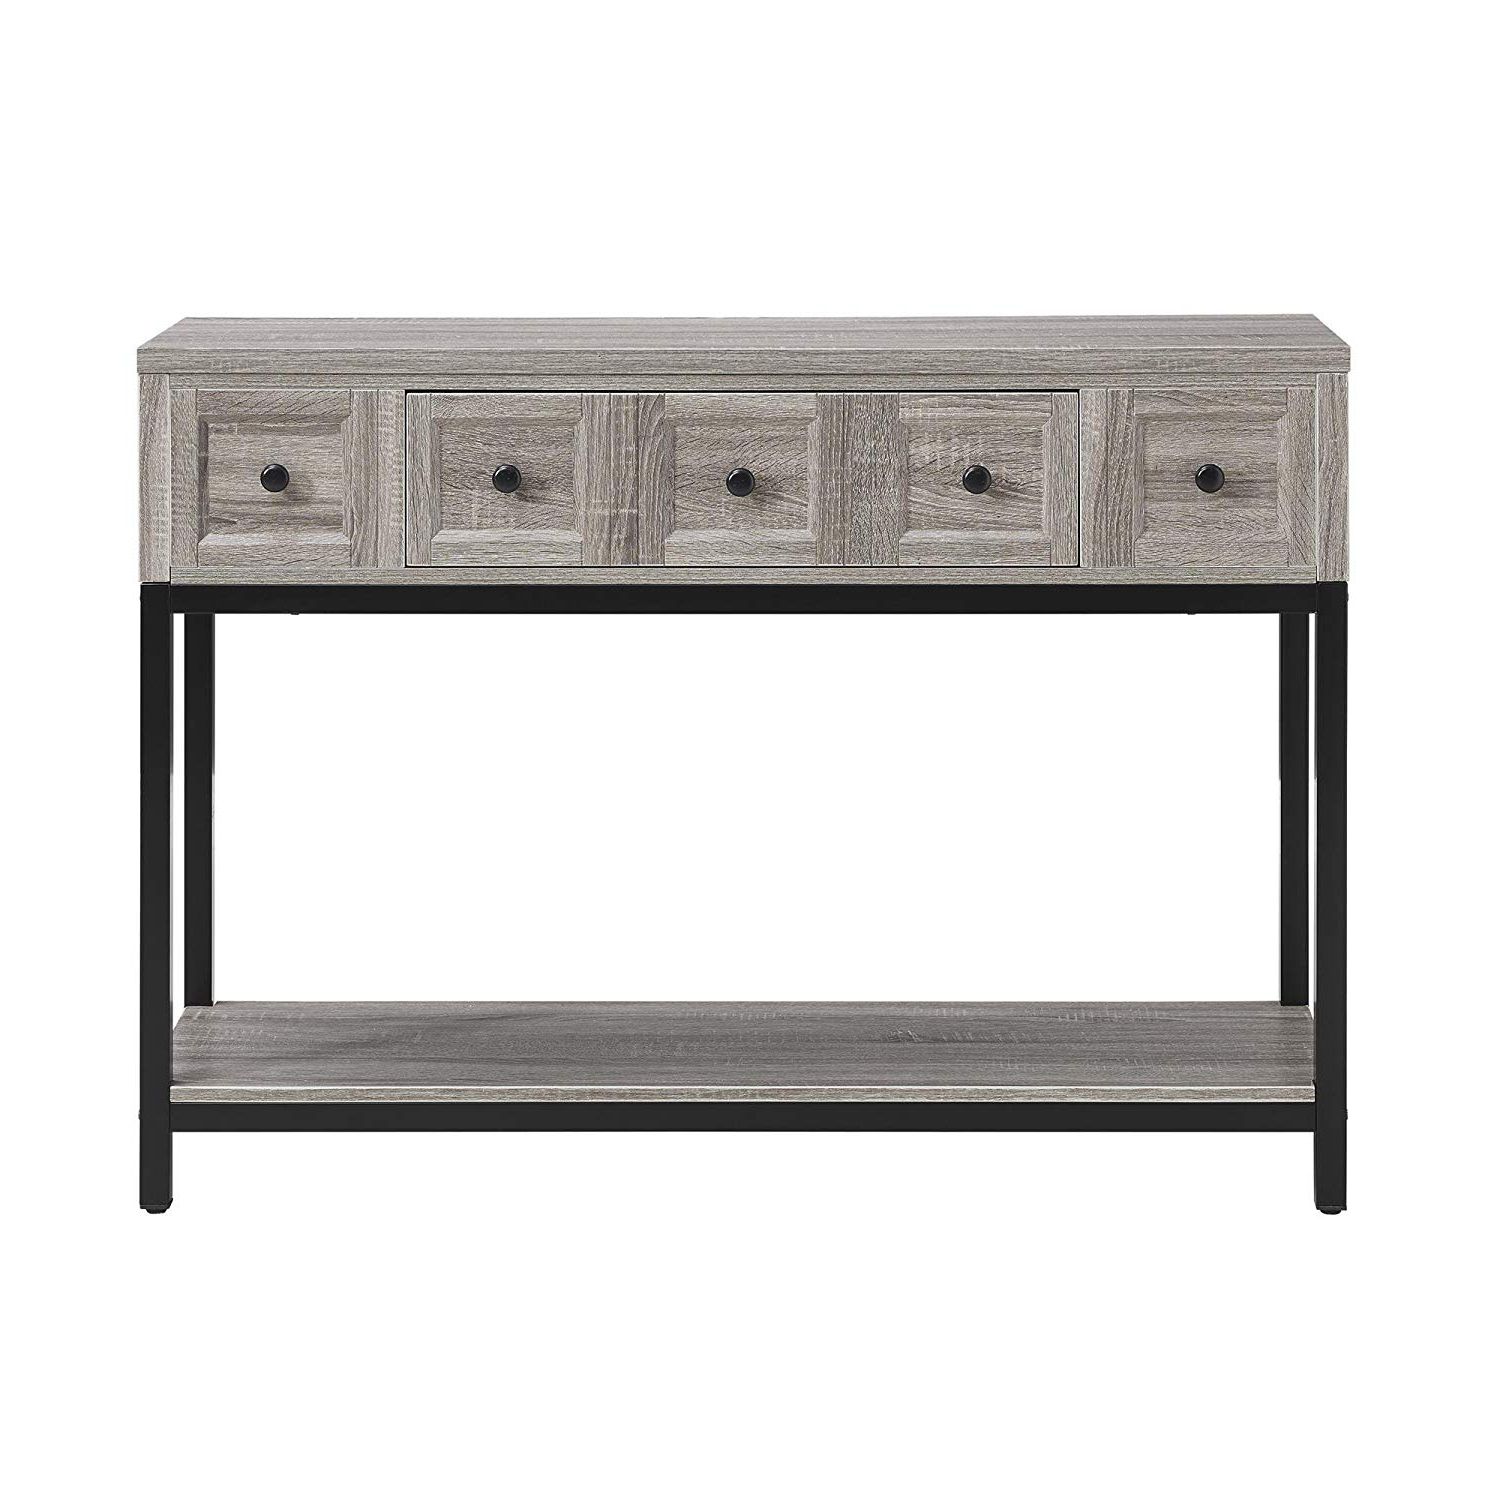 Parsons Walnut Top & Dark Steel Base 48x16 Console Tables Throughout Well Known Altra Furniture Console Table In Sonoma Oak Finish (View 19 of 20)